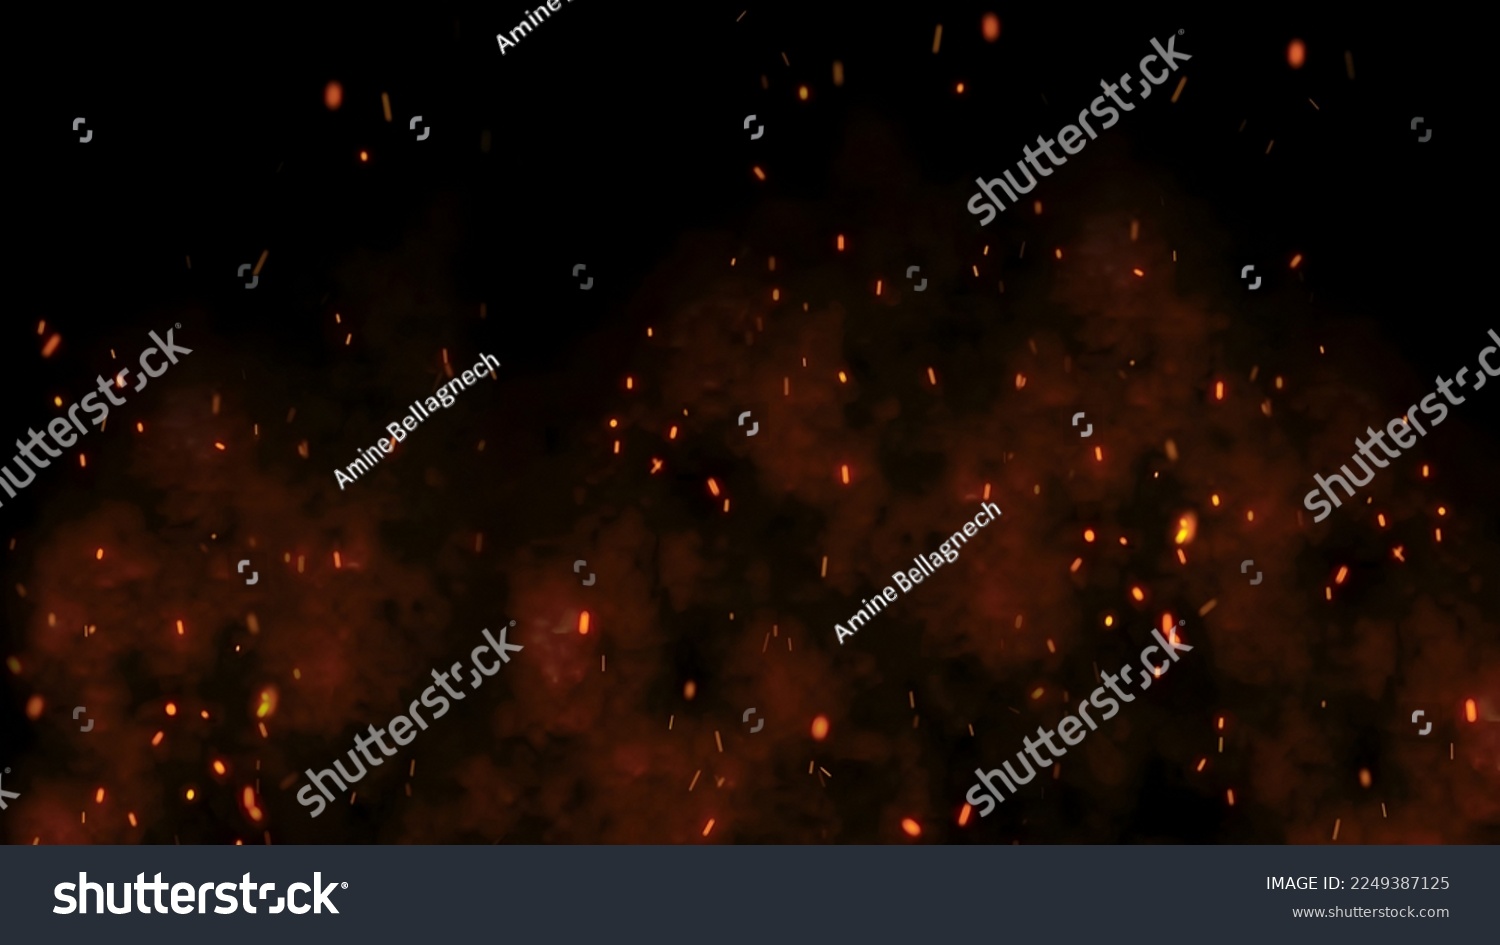 Burning red hot sparks rise from large fire in the night sky. Fiery orange glowing flying away particles over black background in 4k #2249387125